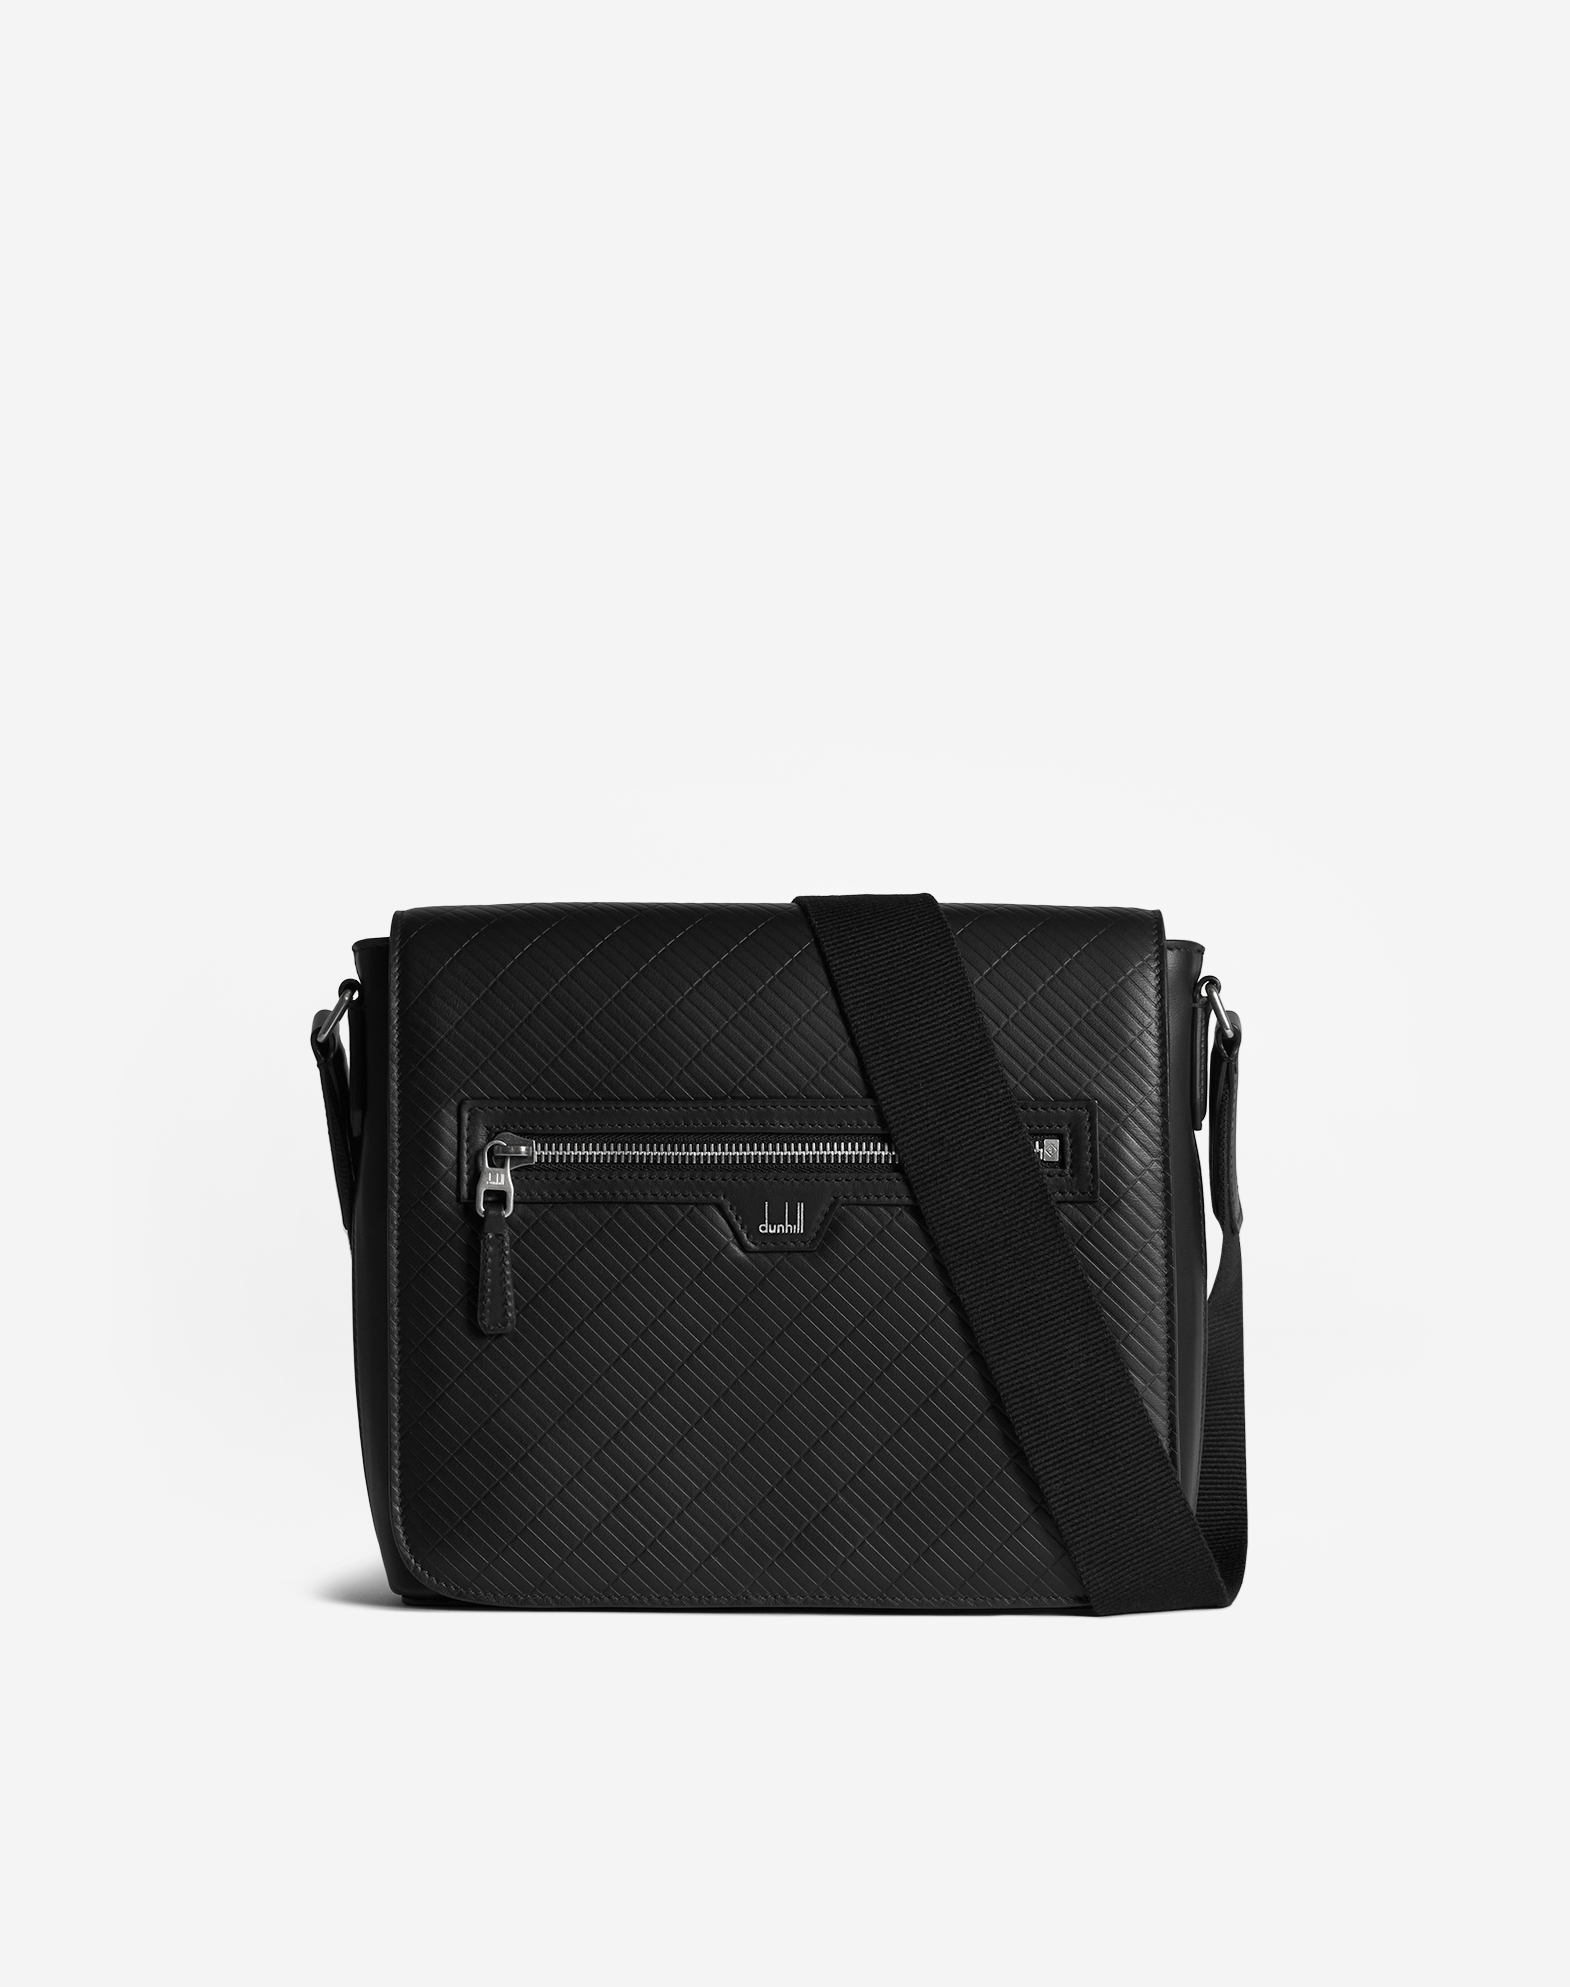 Dunhill Contour Small Flap Messenger In Black